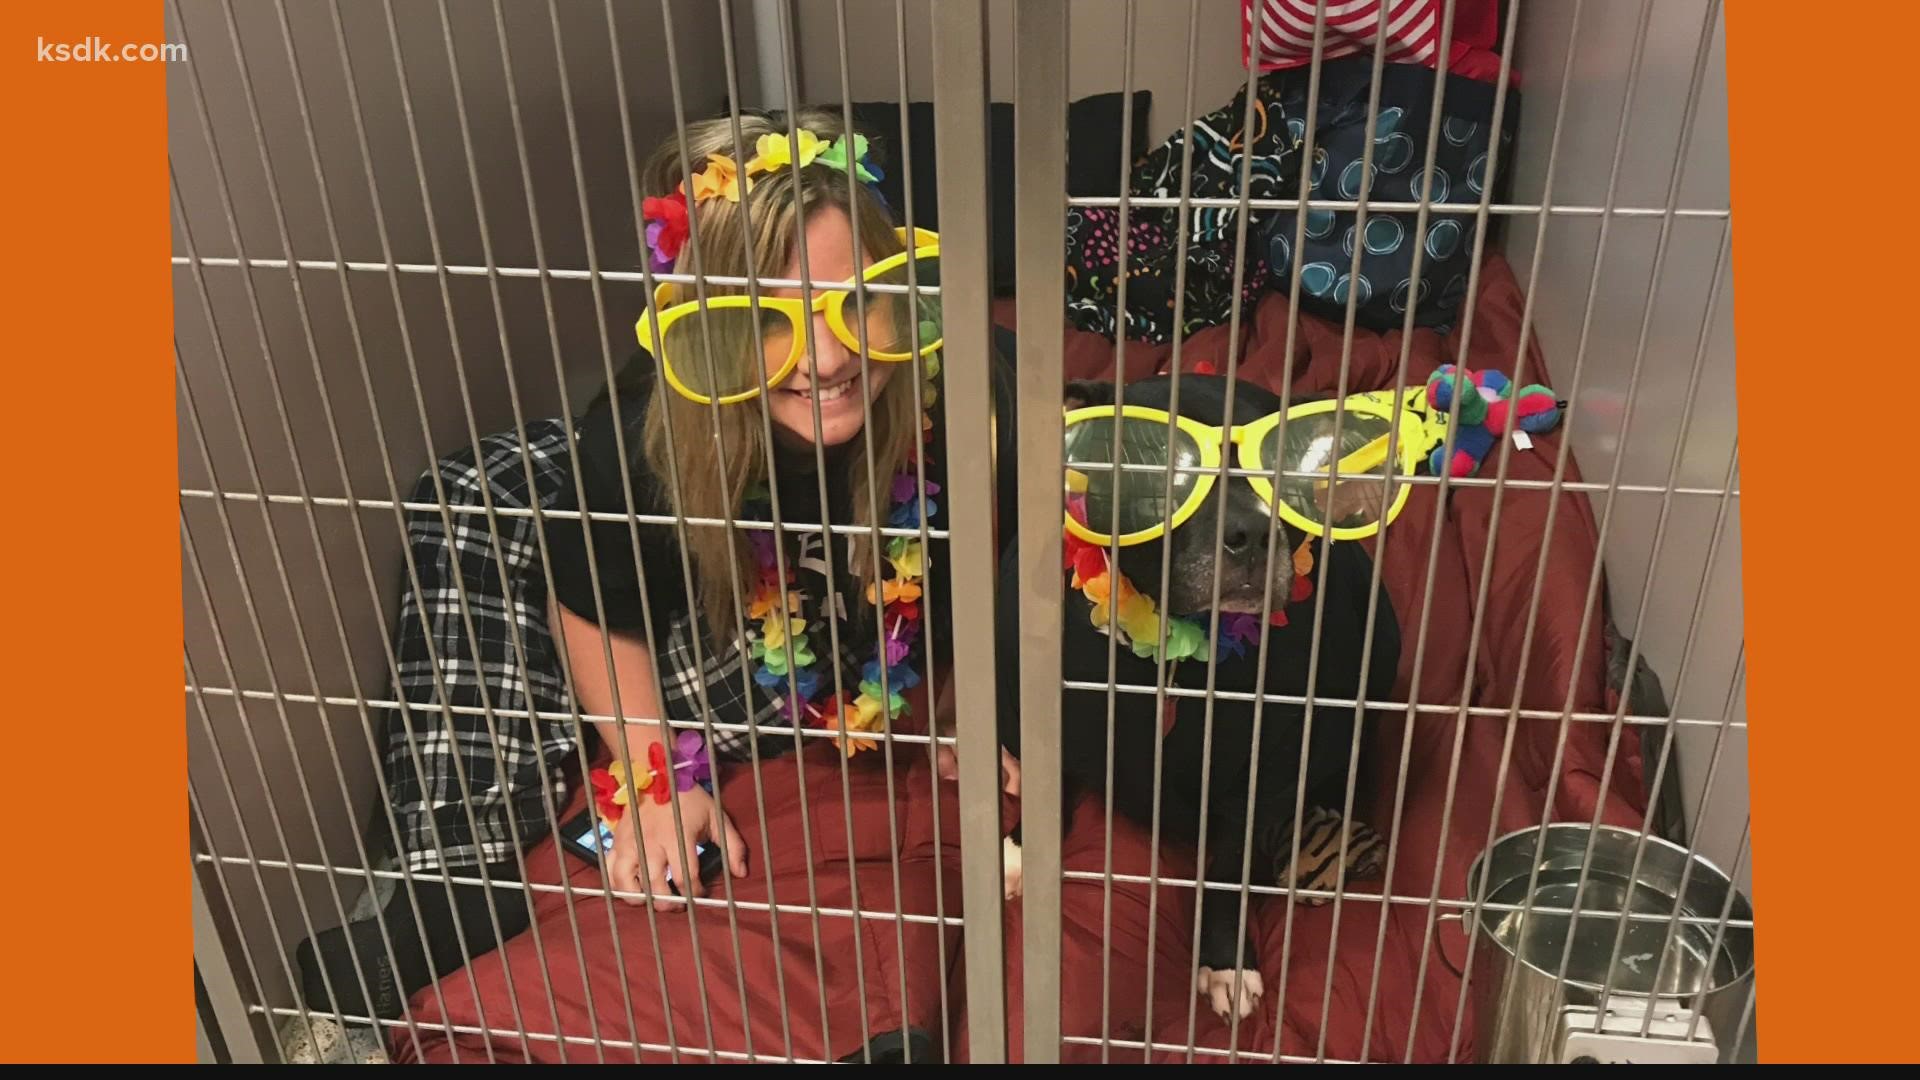 St Louis-based Purina has been sponsoring a slumber "pawty" since 2017. This weekend you can help them raise thousands for 17 area animal shelters.